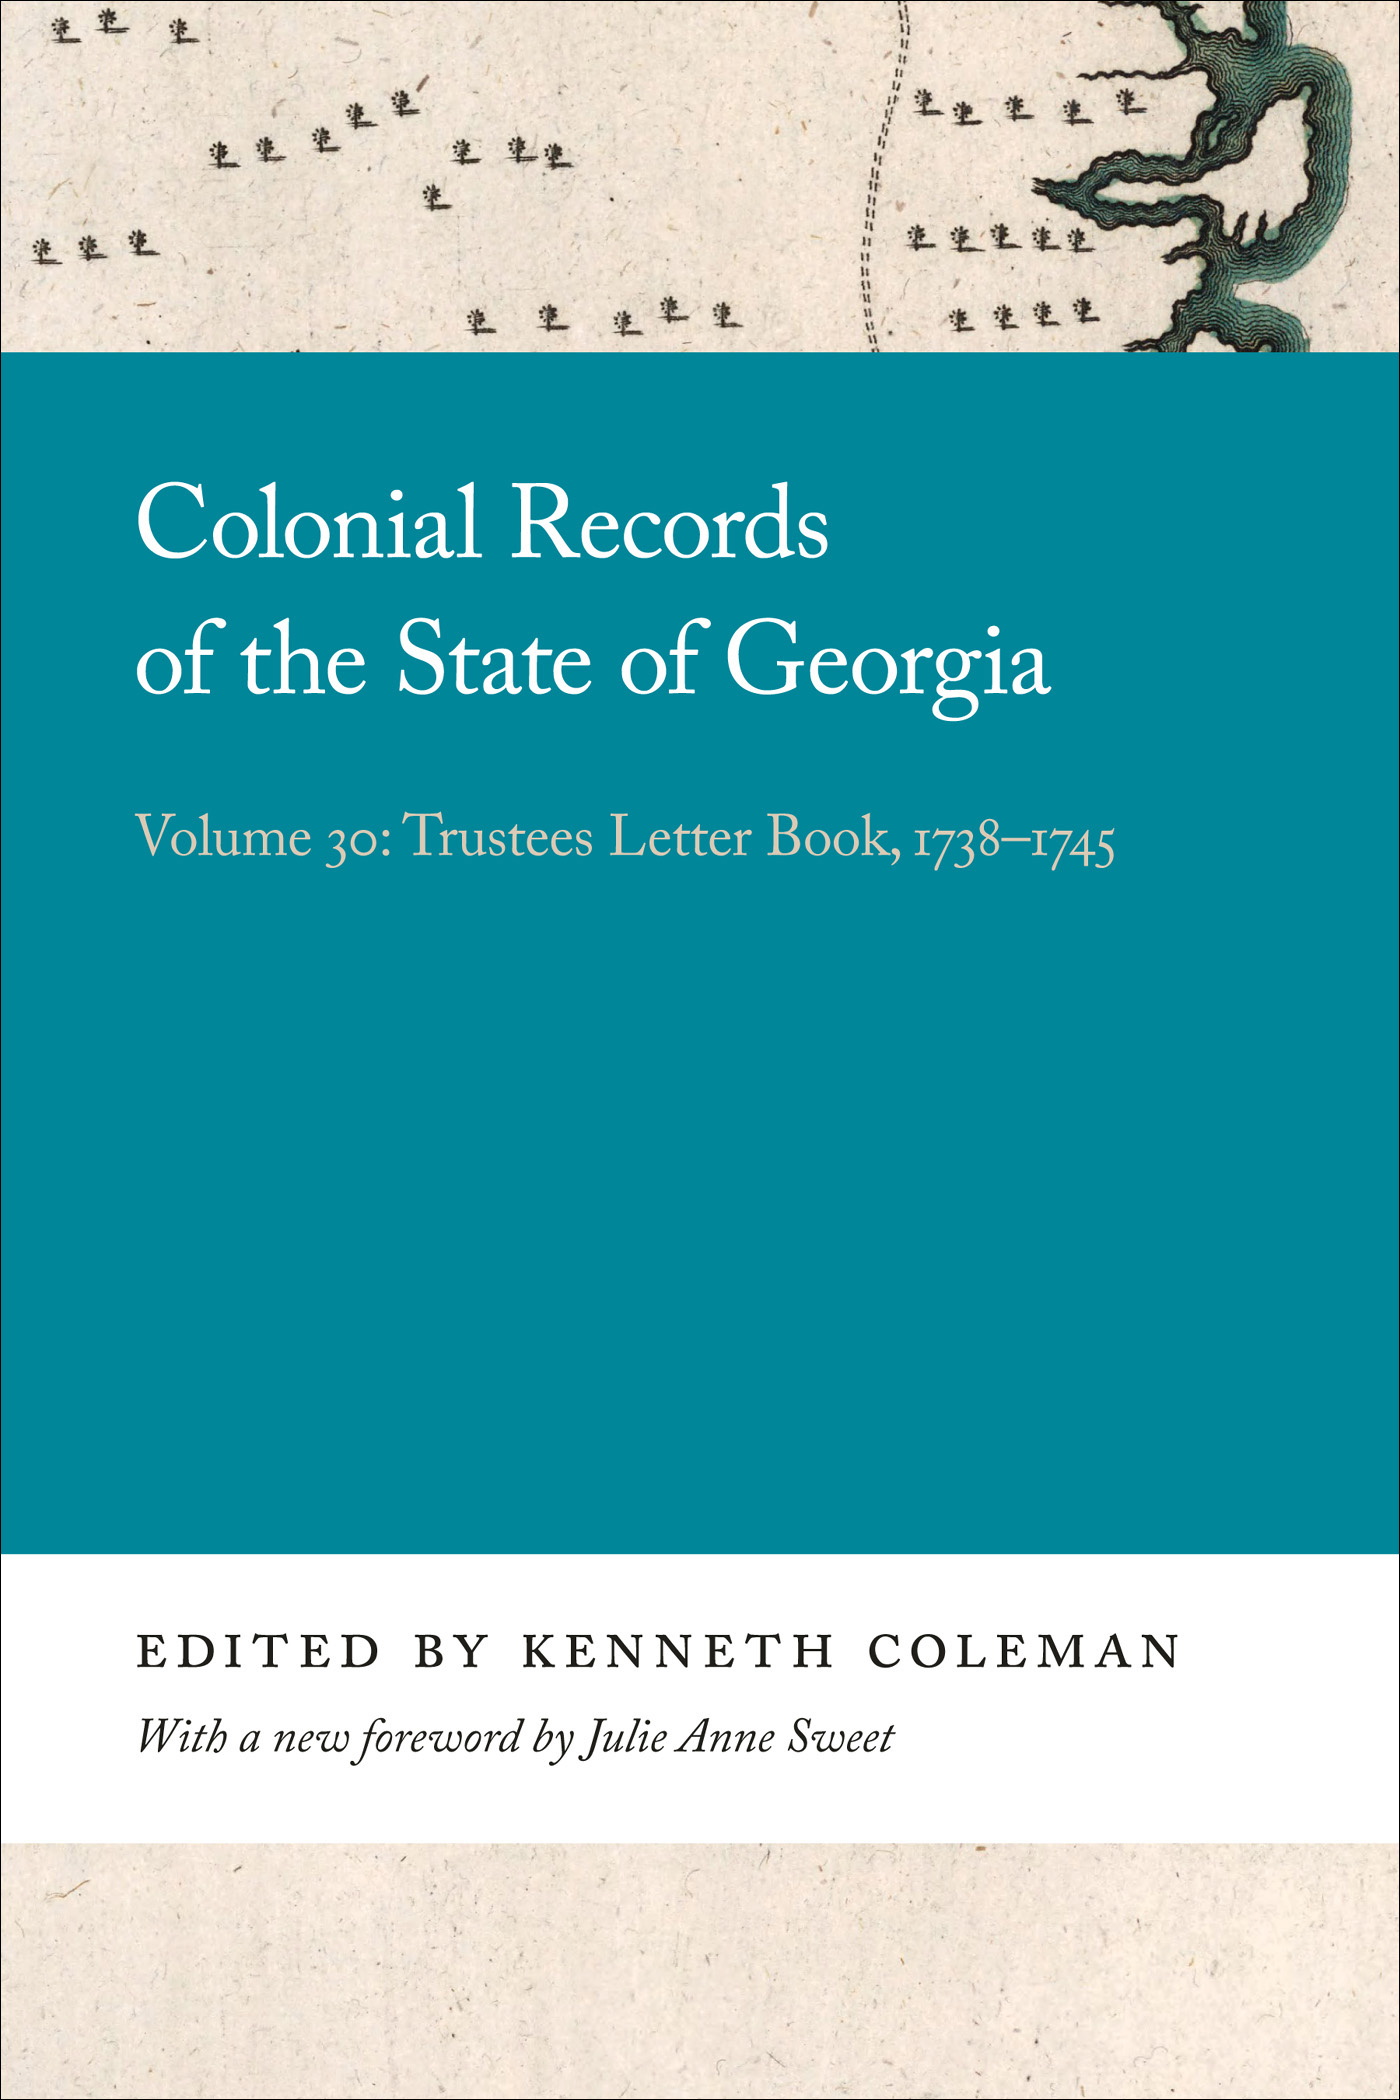 Cover of, Colonial records of the State of Georgia, volume 30 : trustees letter book, 1738 to 1745.